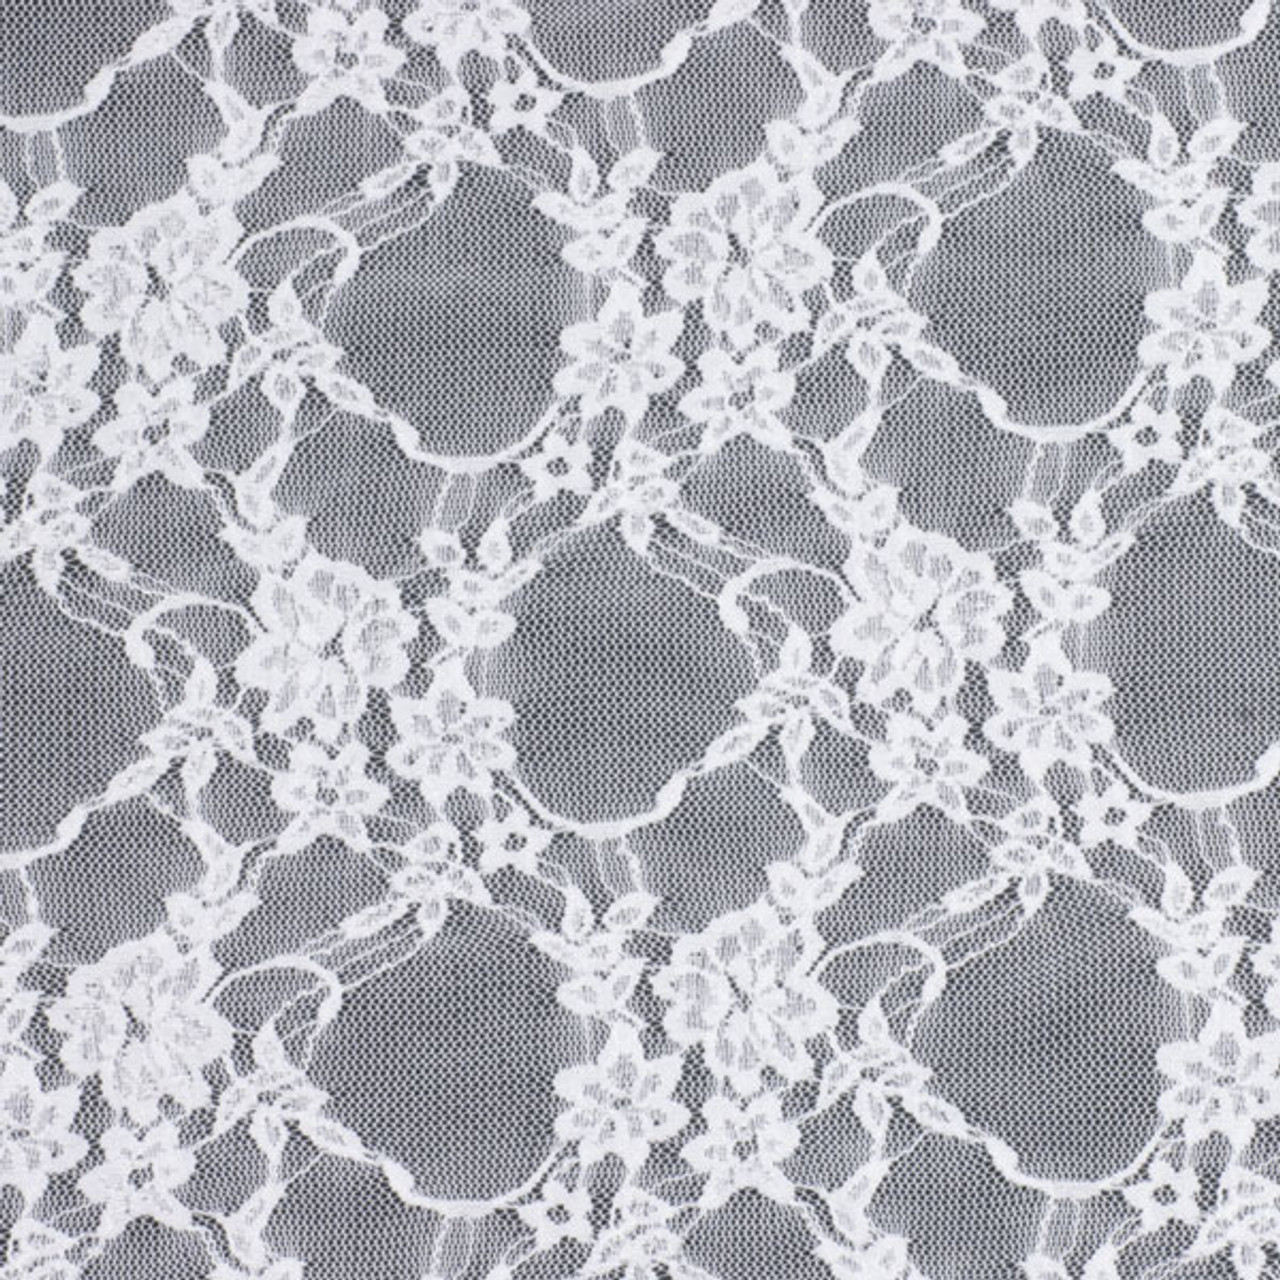 Lace fabric - Supplies